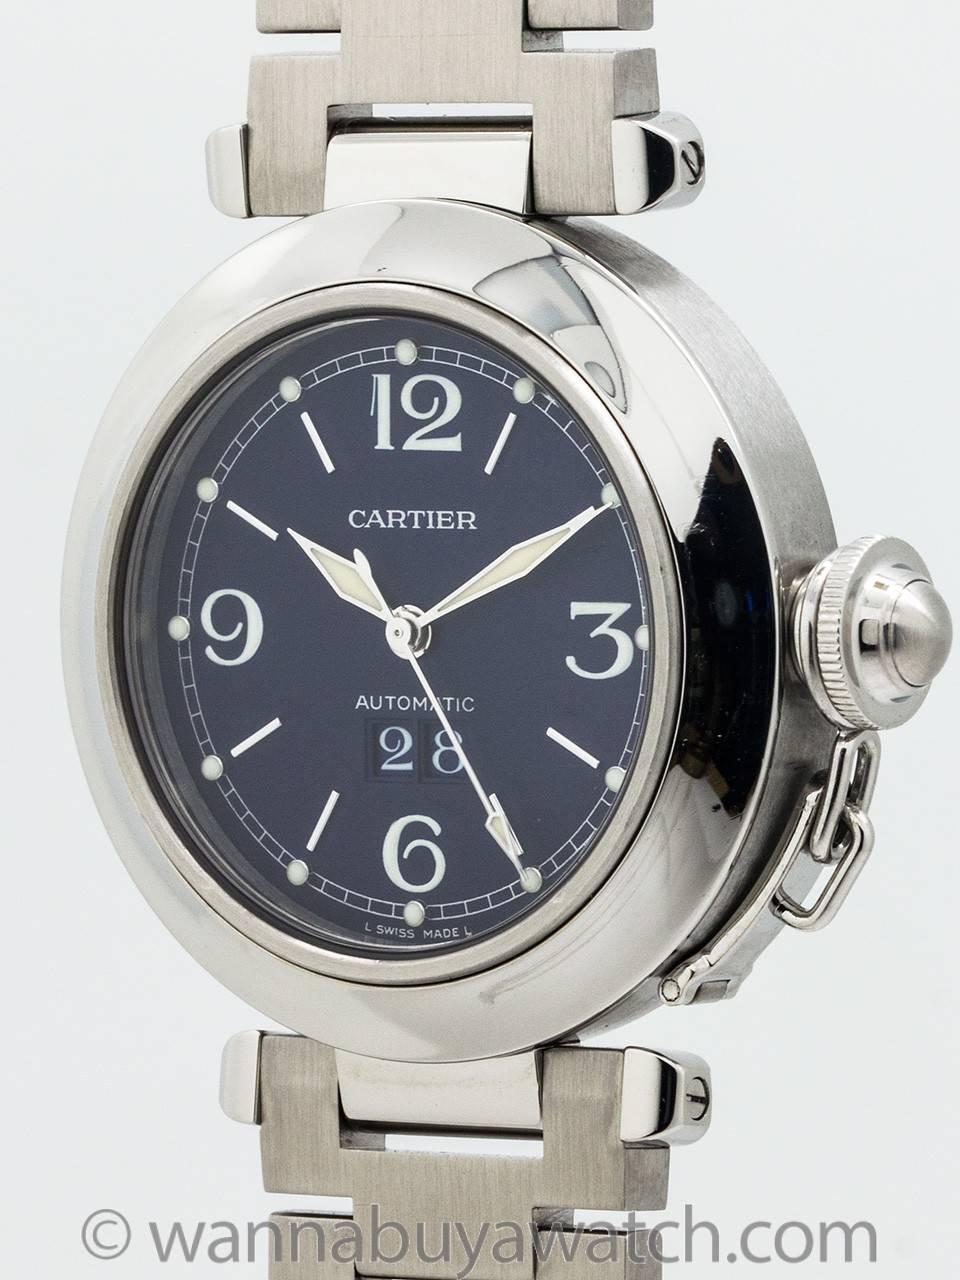 
Cartier Stainless Steel Pasha C ref 2475. 35.5 x 42 diameter case with smooth bezel, sapphire crystal and stainless steel screw down canteen style crown protector. Newer style so called “big date” window. Featuring original navy blue dial with